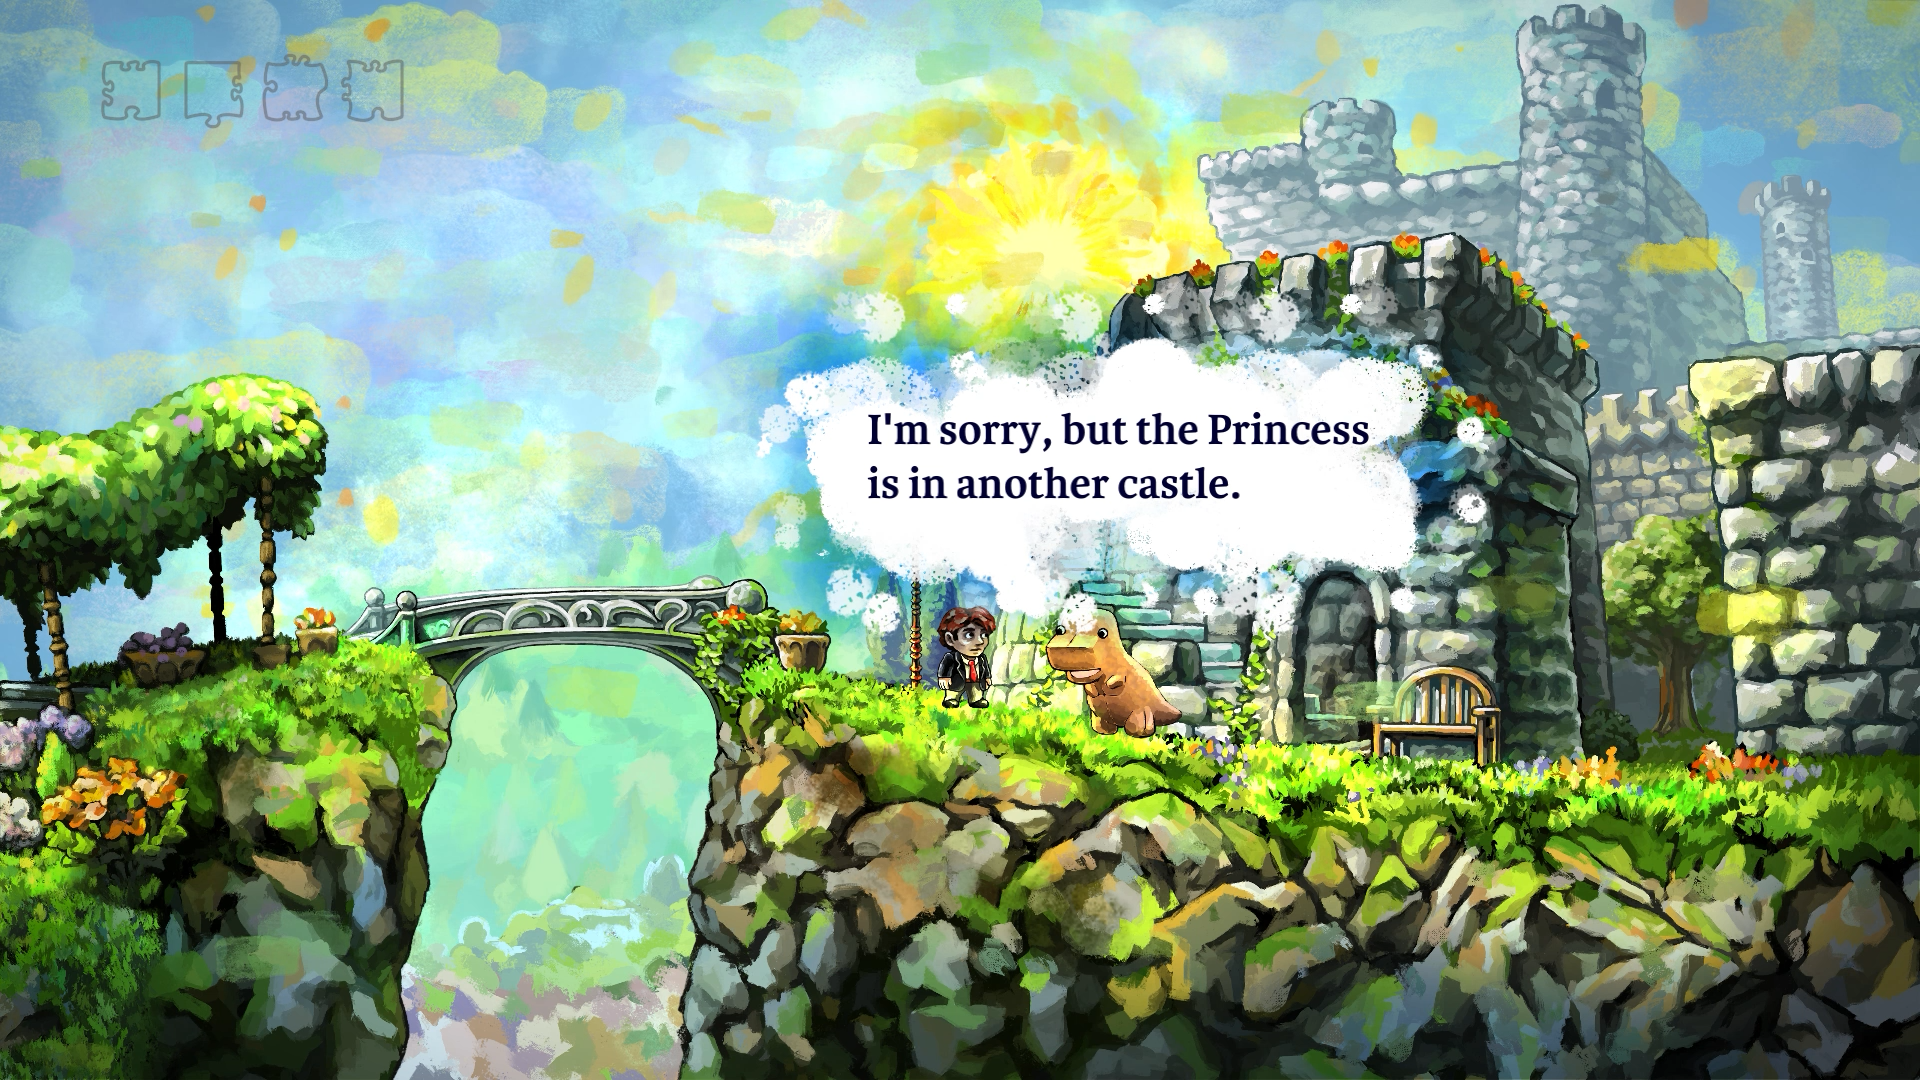 Tim speaking to a small dinsosaur in front of a castle in Braid Anniversary Edition.